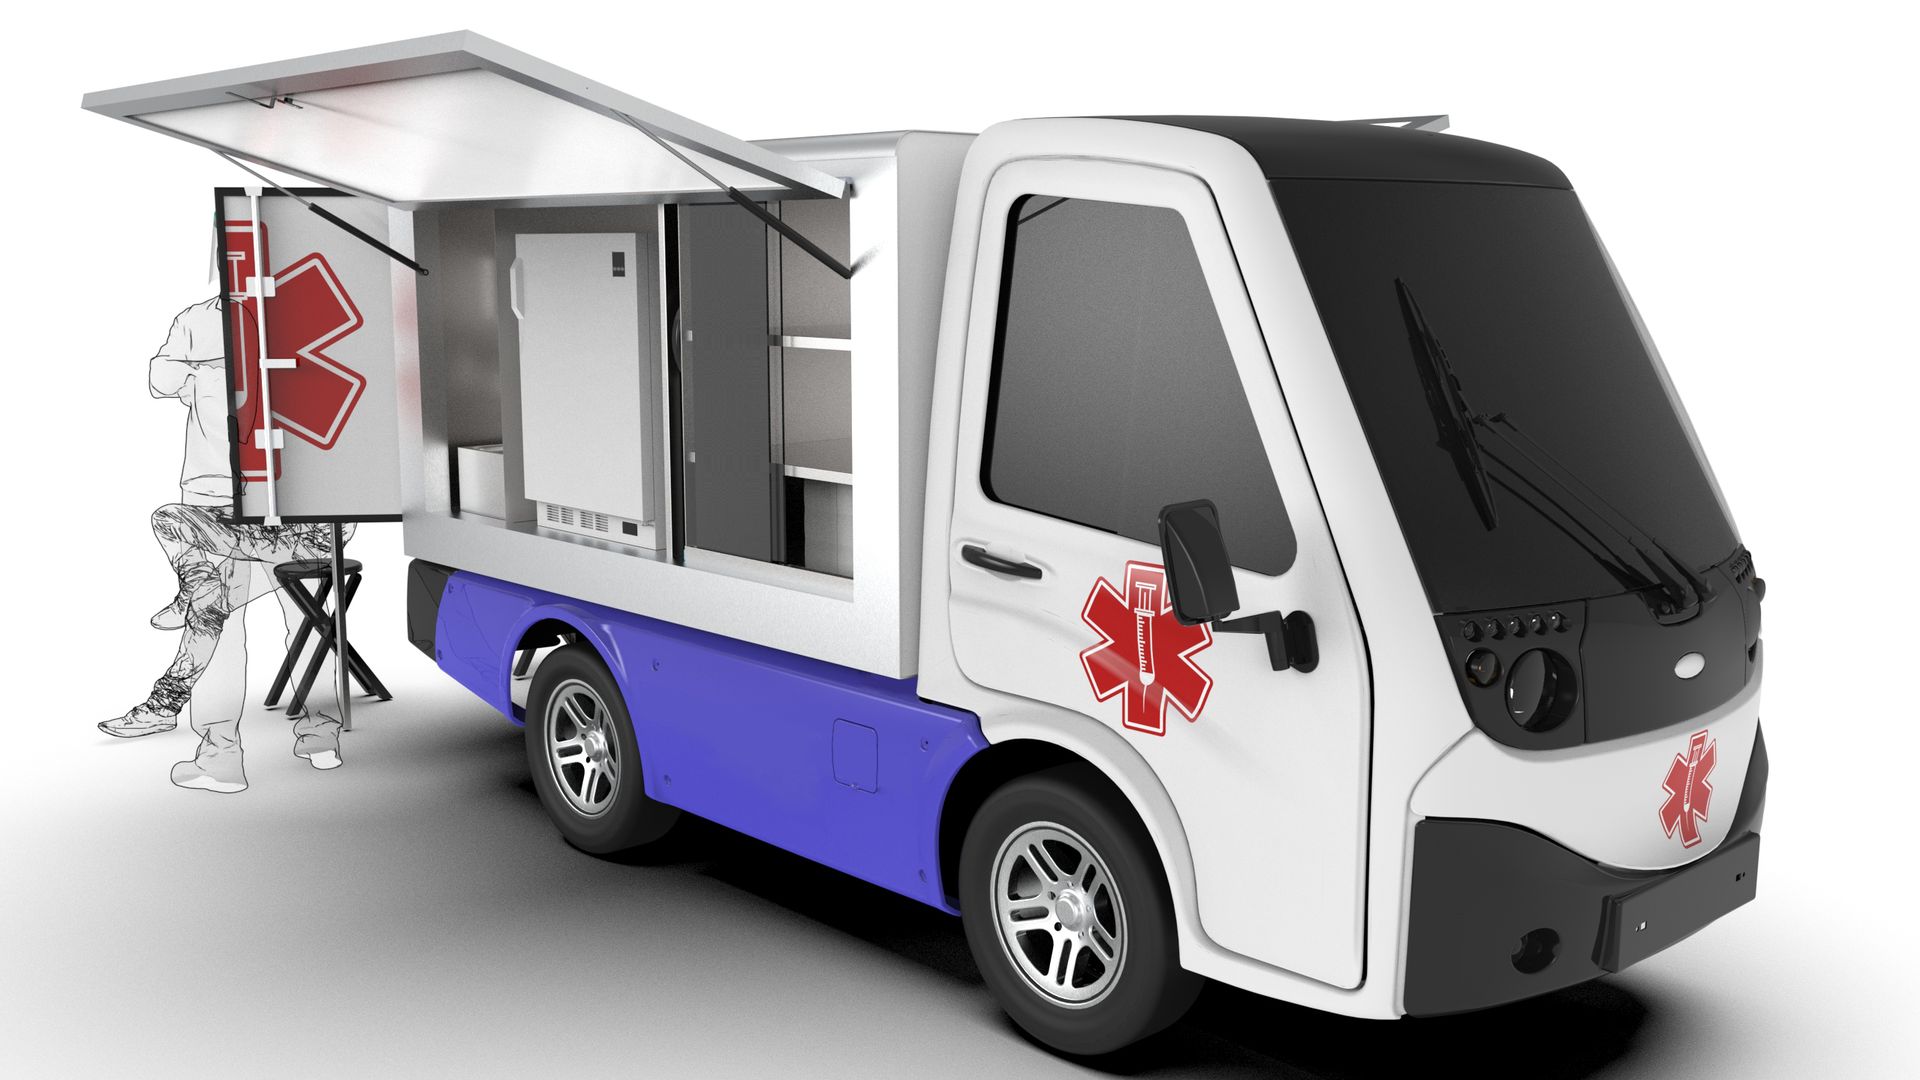 Image of an electric vaccine vehicle  intended for mobile clinics